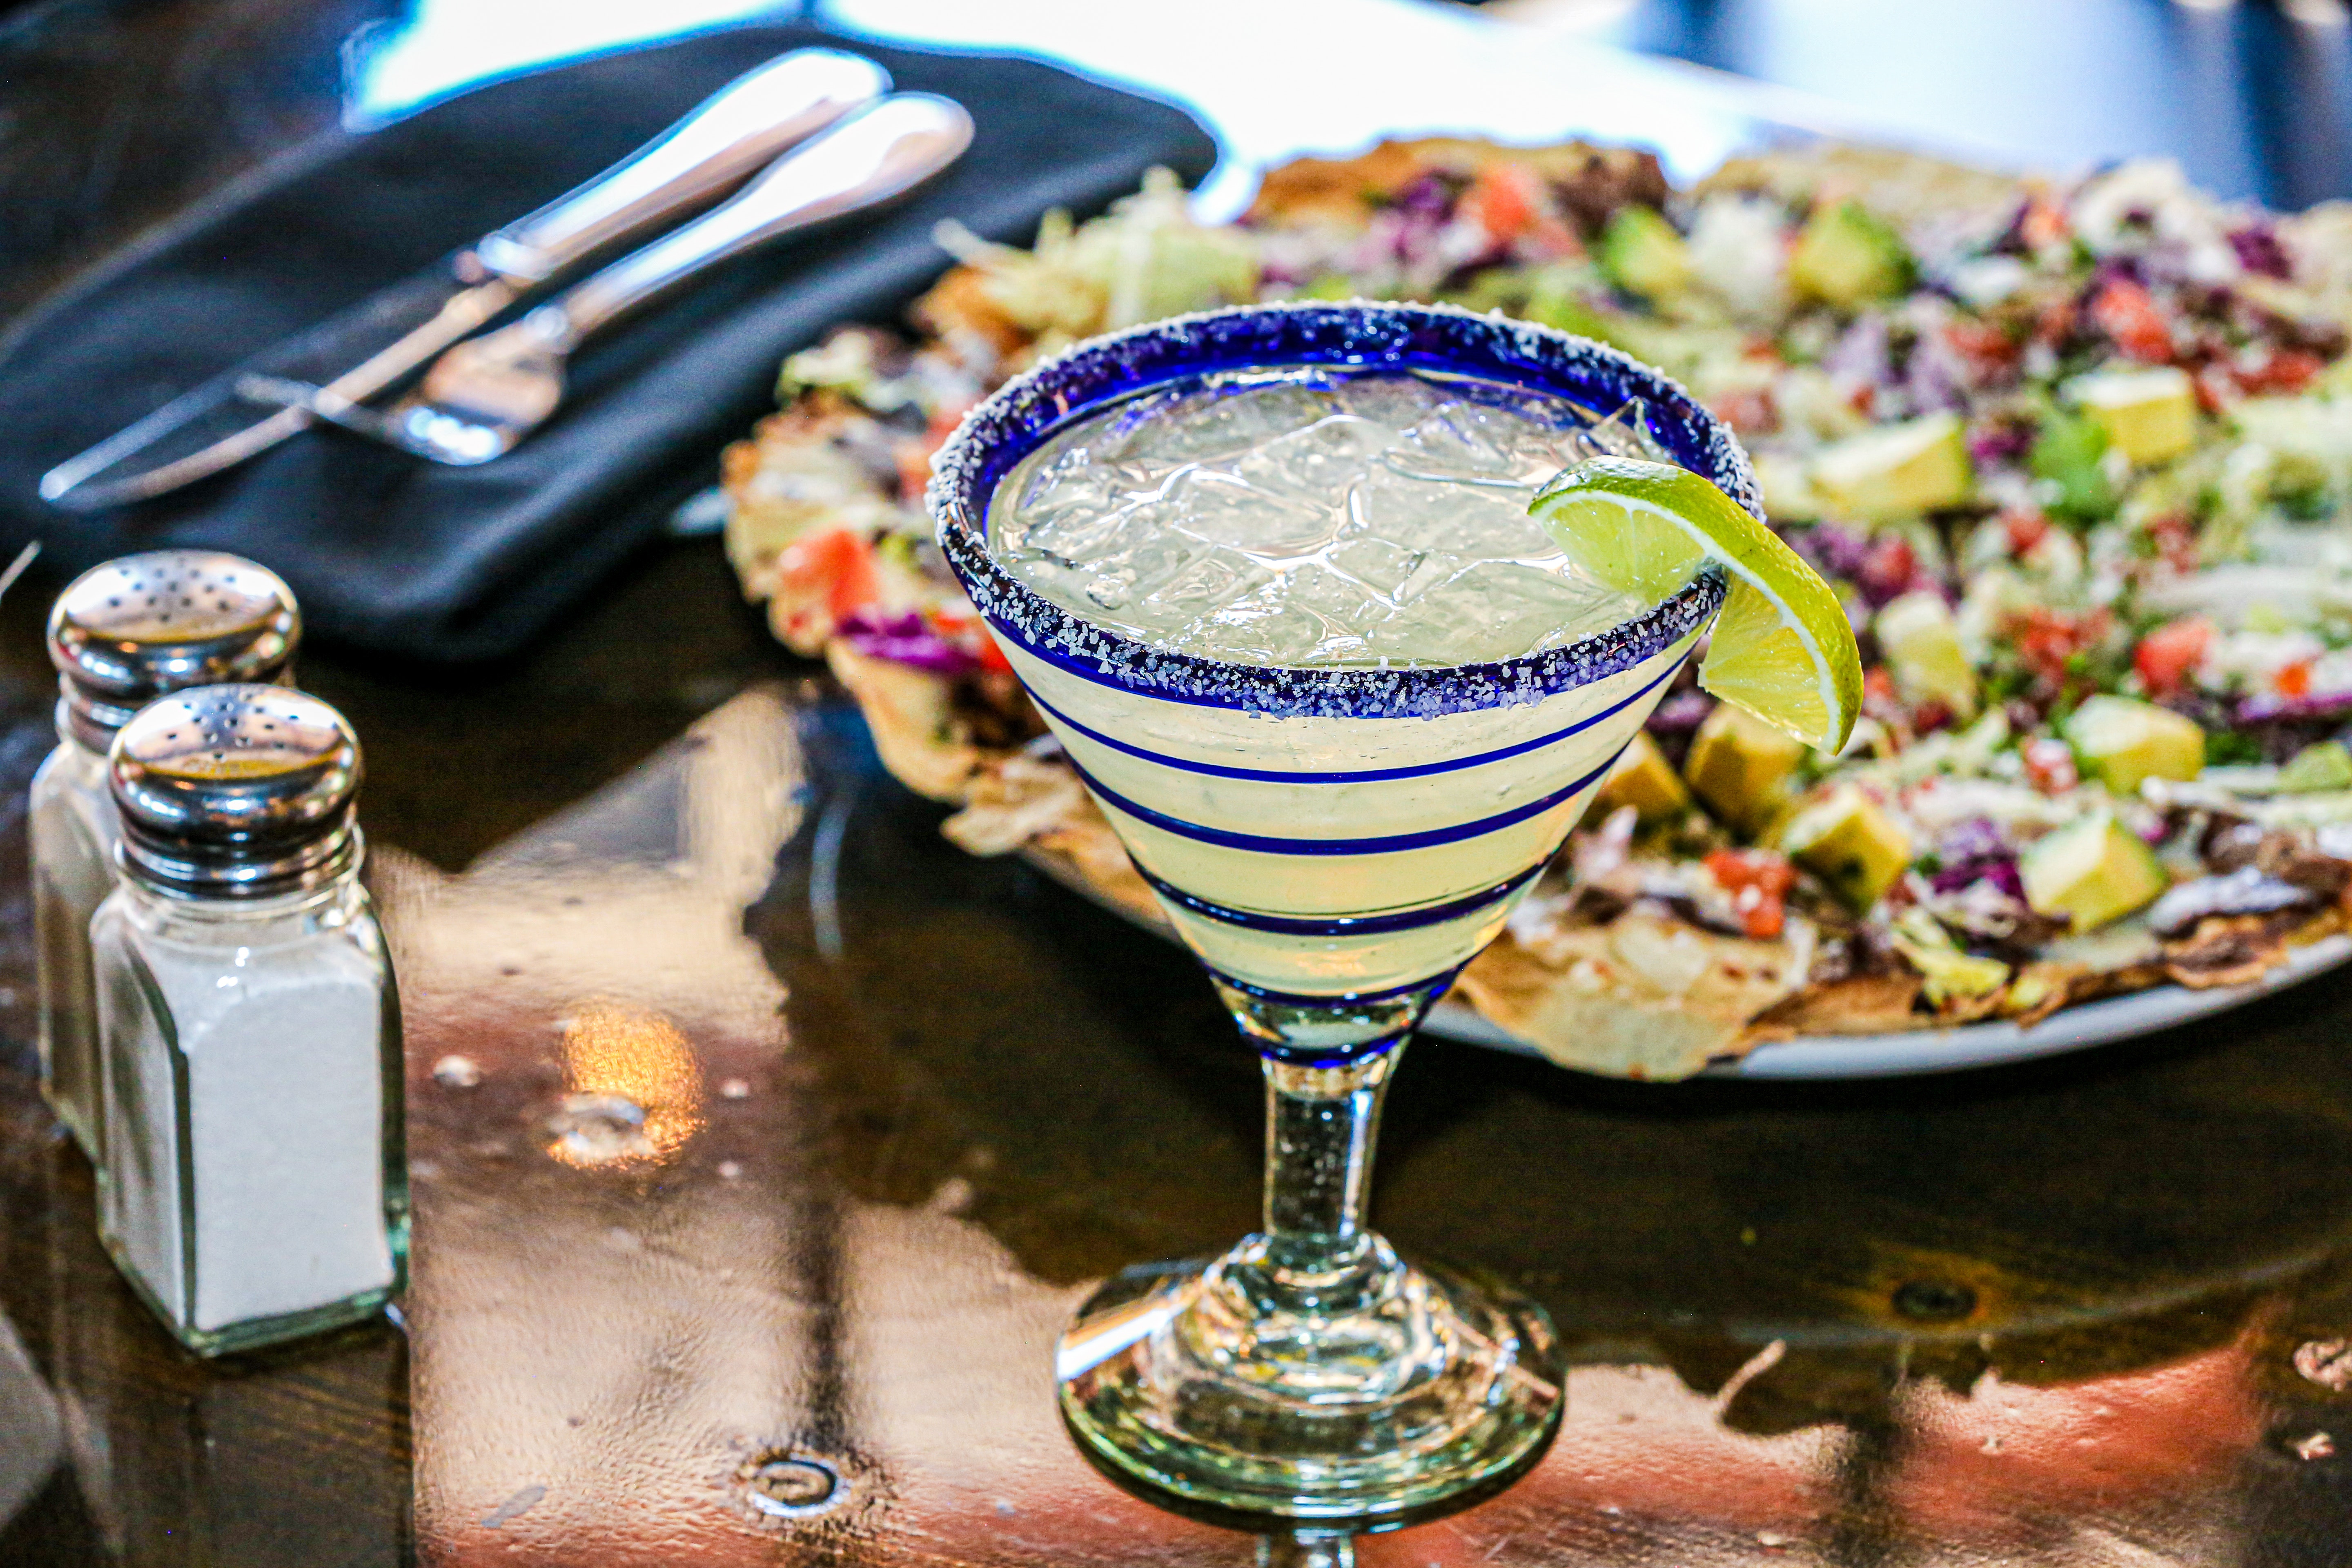 A festive margarita glass with a salted rim and lime wedge in the foreground, with a plate of nachos and condiments in the background, set on a reflective table surface, evoking a celebratory atmosphere likely related to Cinco de Mayo.